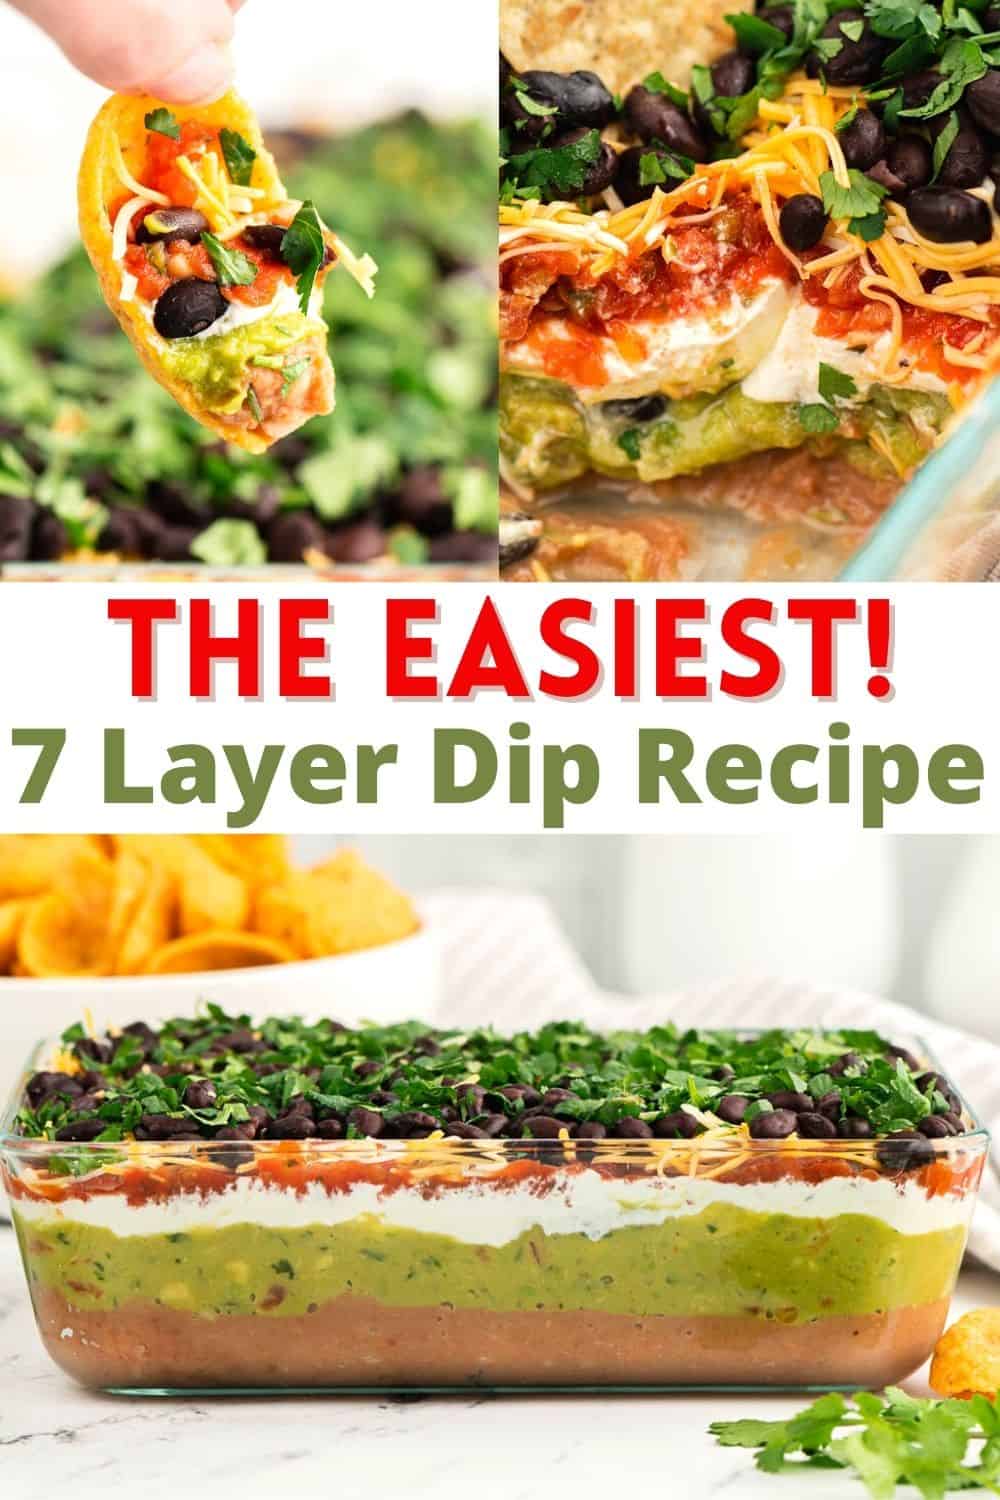 This 7 layer dip is a quick and easy party appetizer loaded with flavor. It's the best Mexican dip with 7 layers of delicious ingredients. Serve with tortilla chips or scoops!